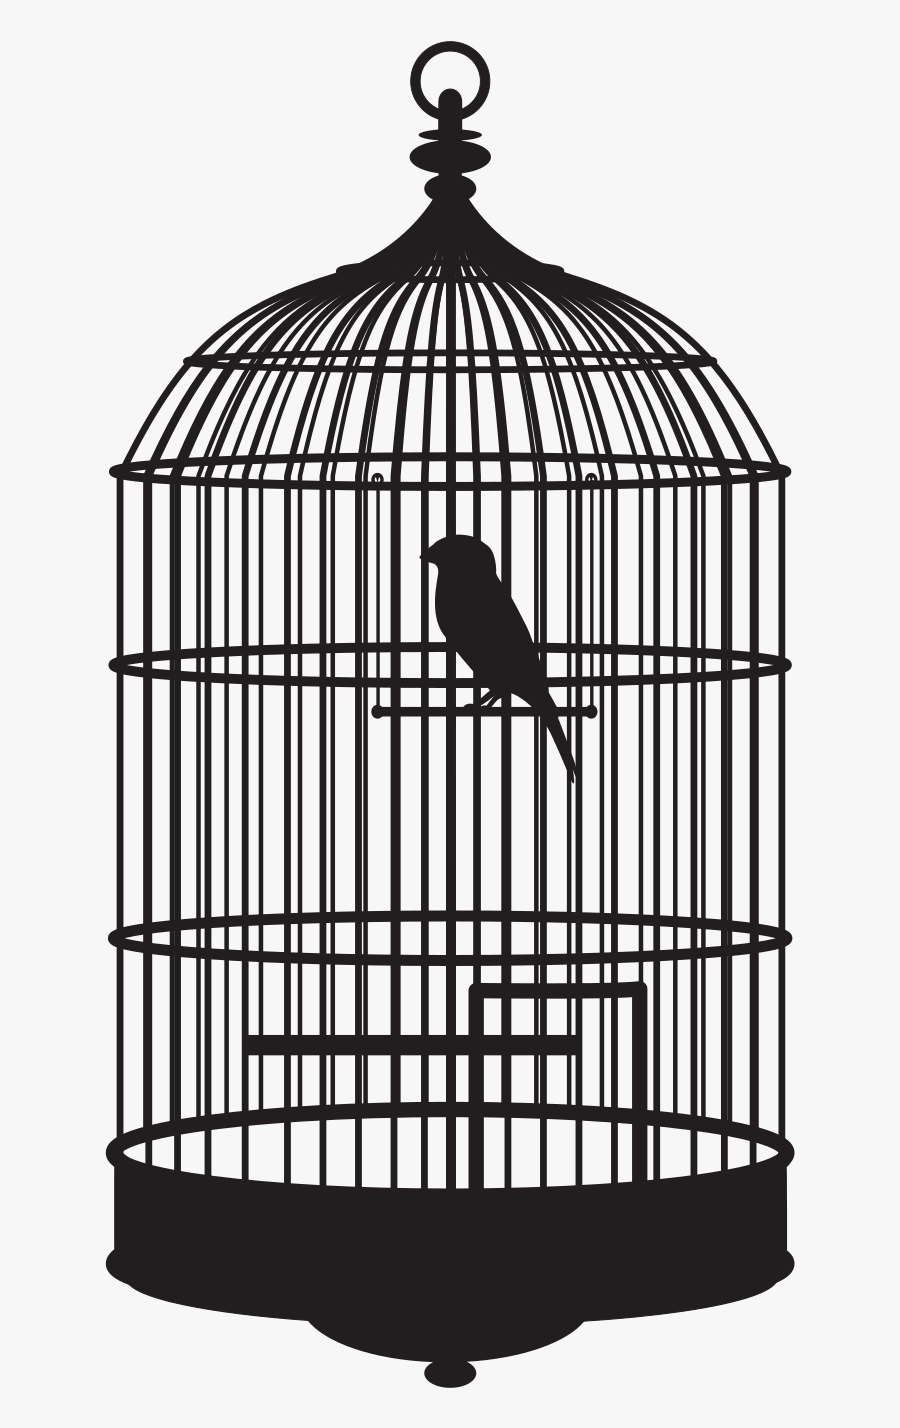 Bird In A Cage - Bird In Cage Gif, Transparent Clipart